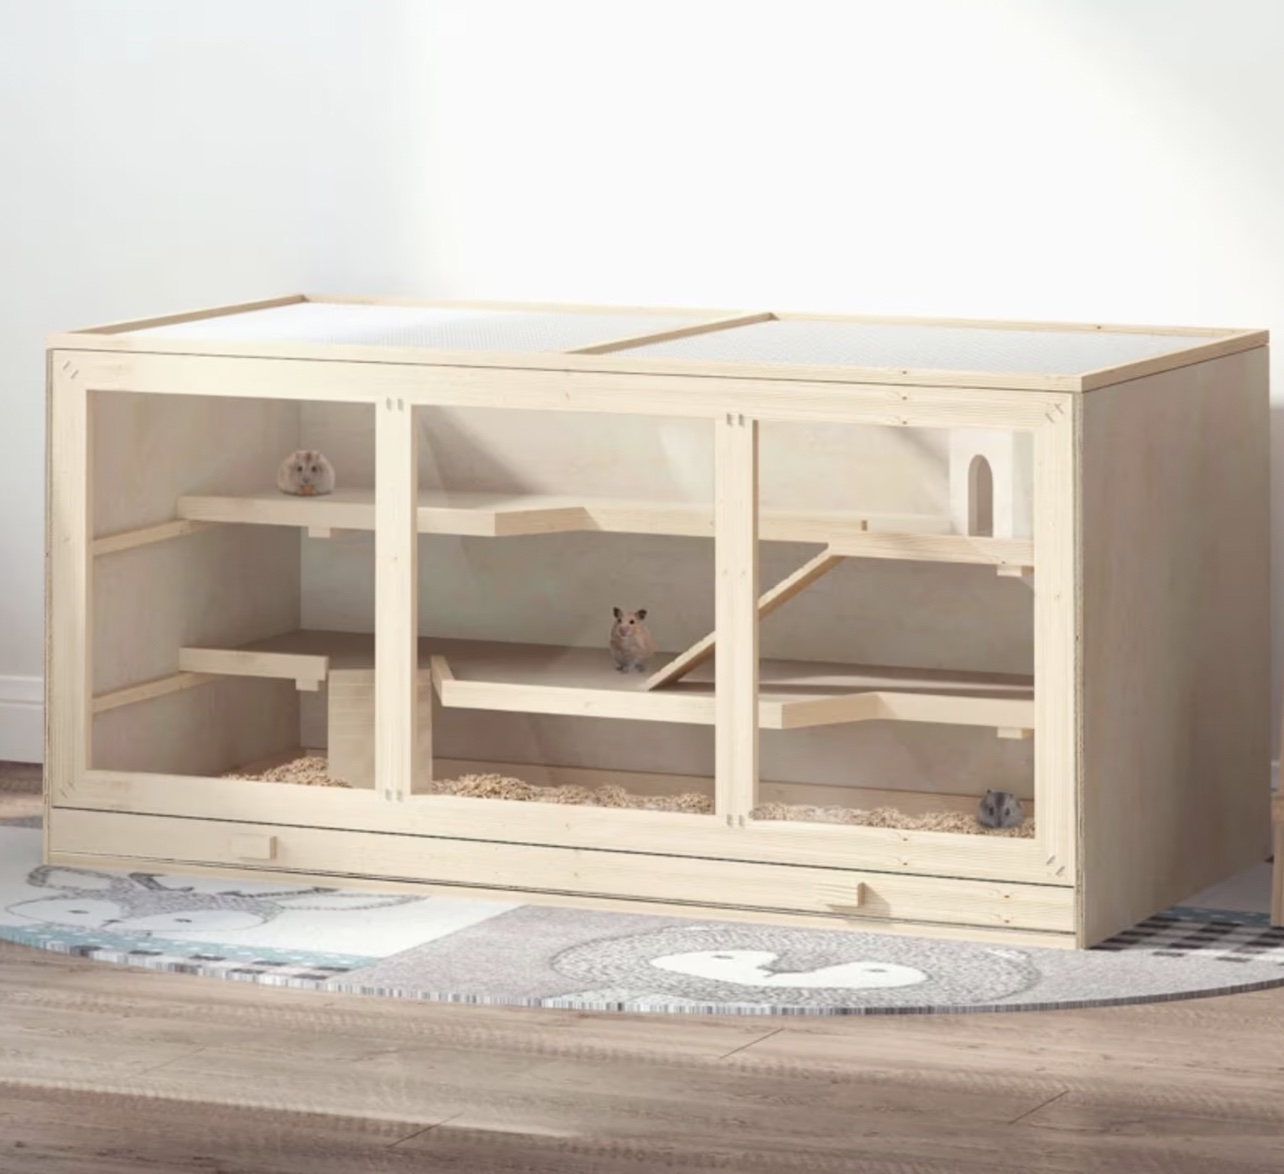 three-tier hamster cage made of light colored wood